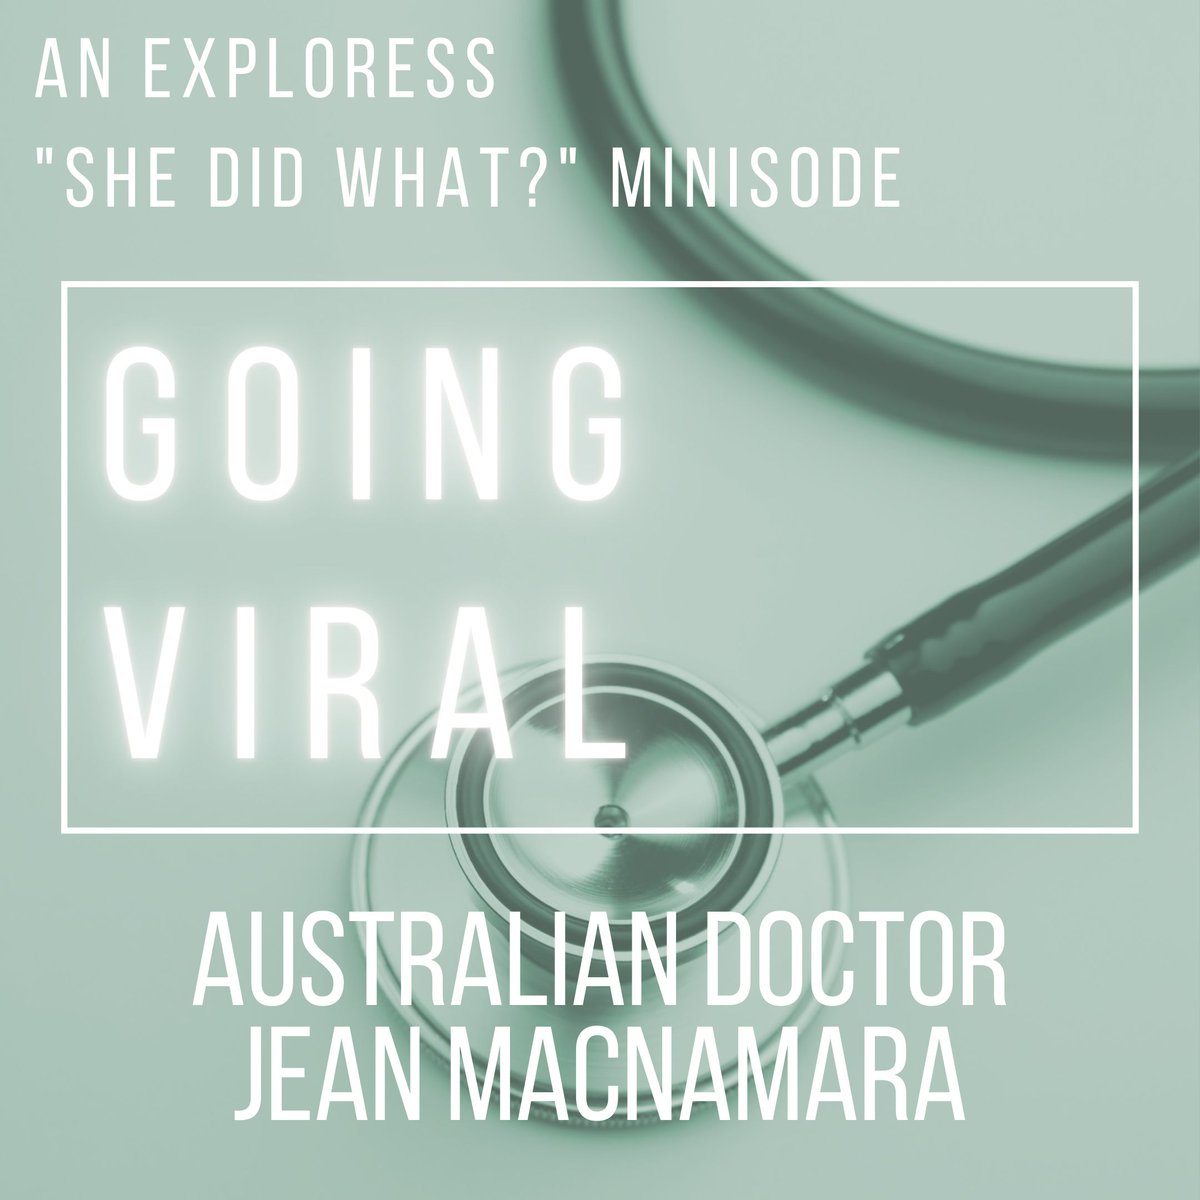 A new bonus is live! Learn about Aussie legend Jean Macnamara, who wasn't one to take no for an answer. buff.ly/3yzDuDC